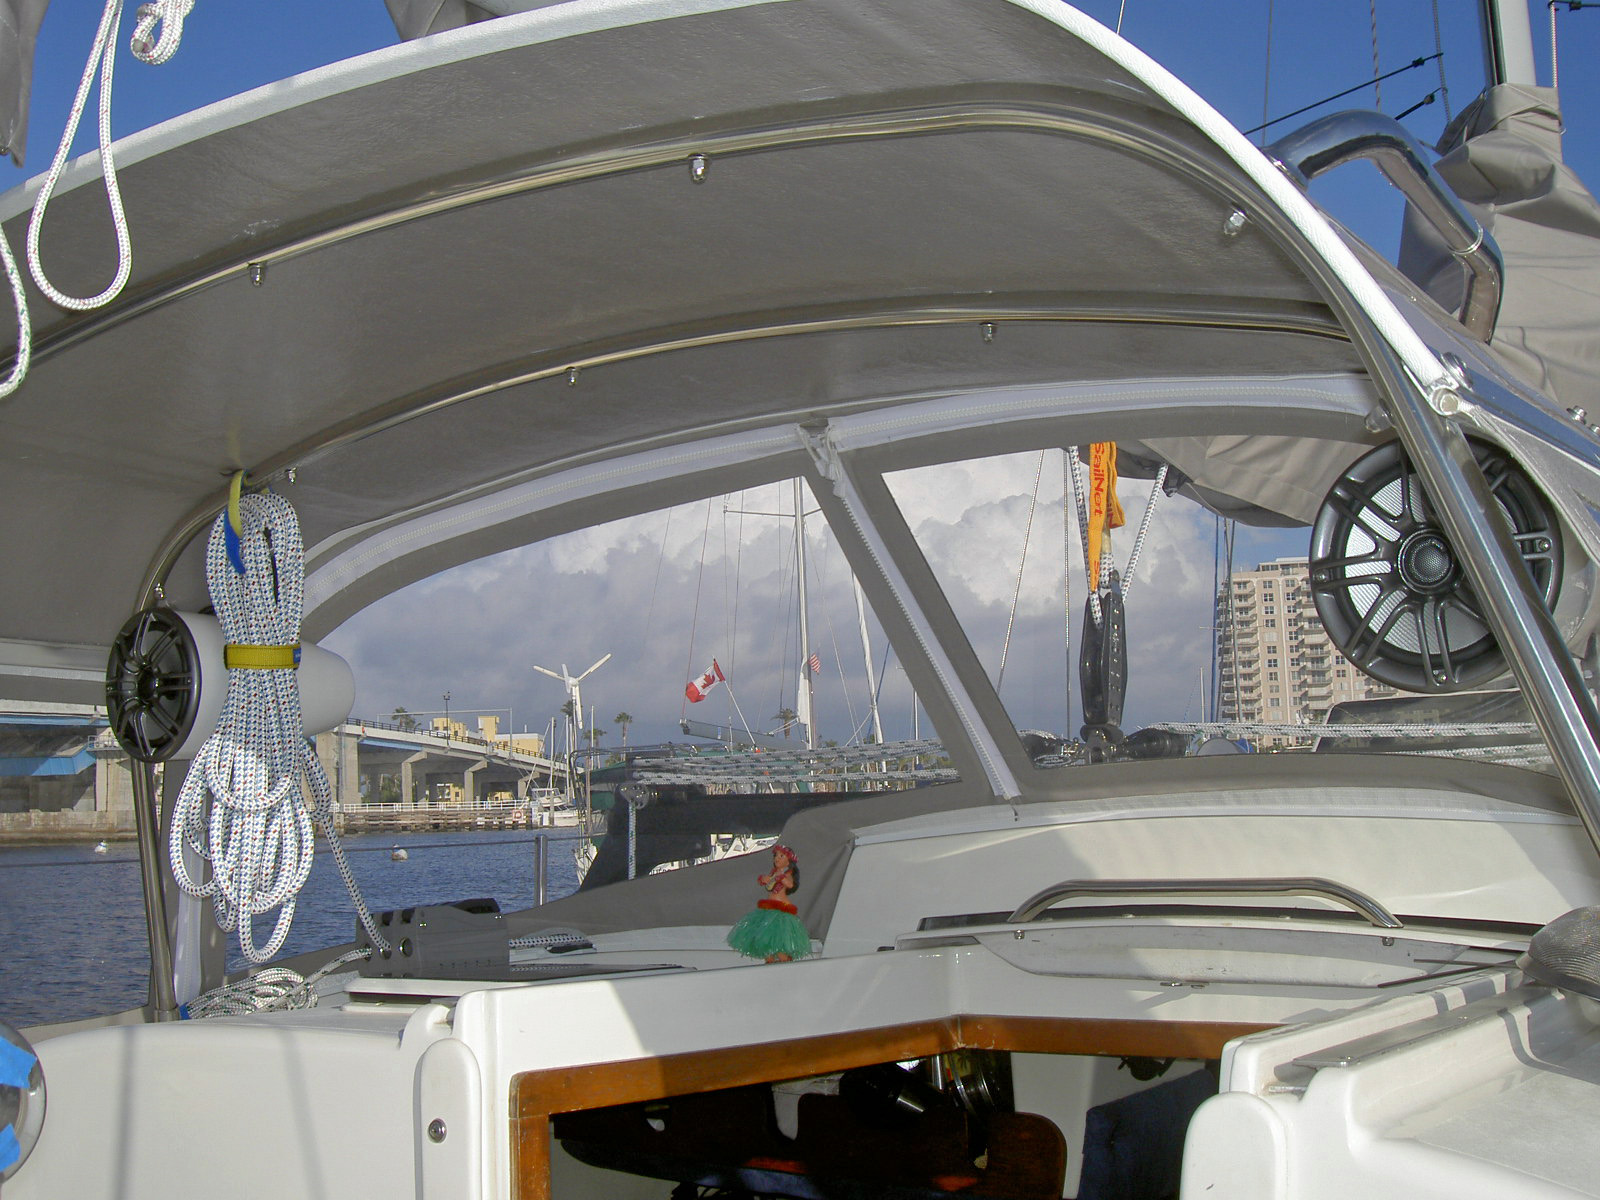  Equipment for a Cruising Boat – Bluewater Sailboat Equipment — Get